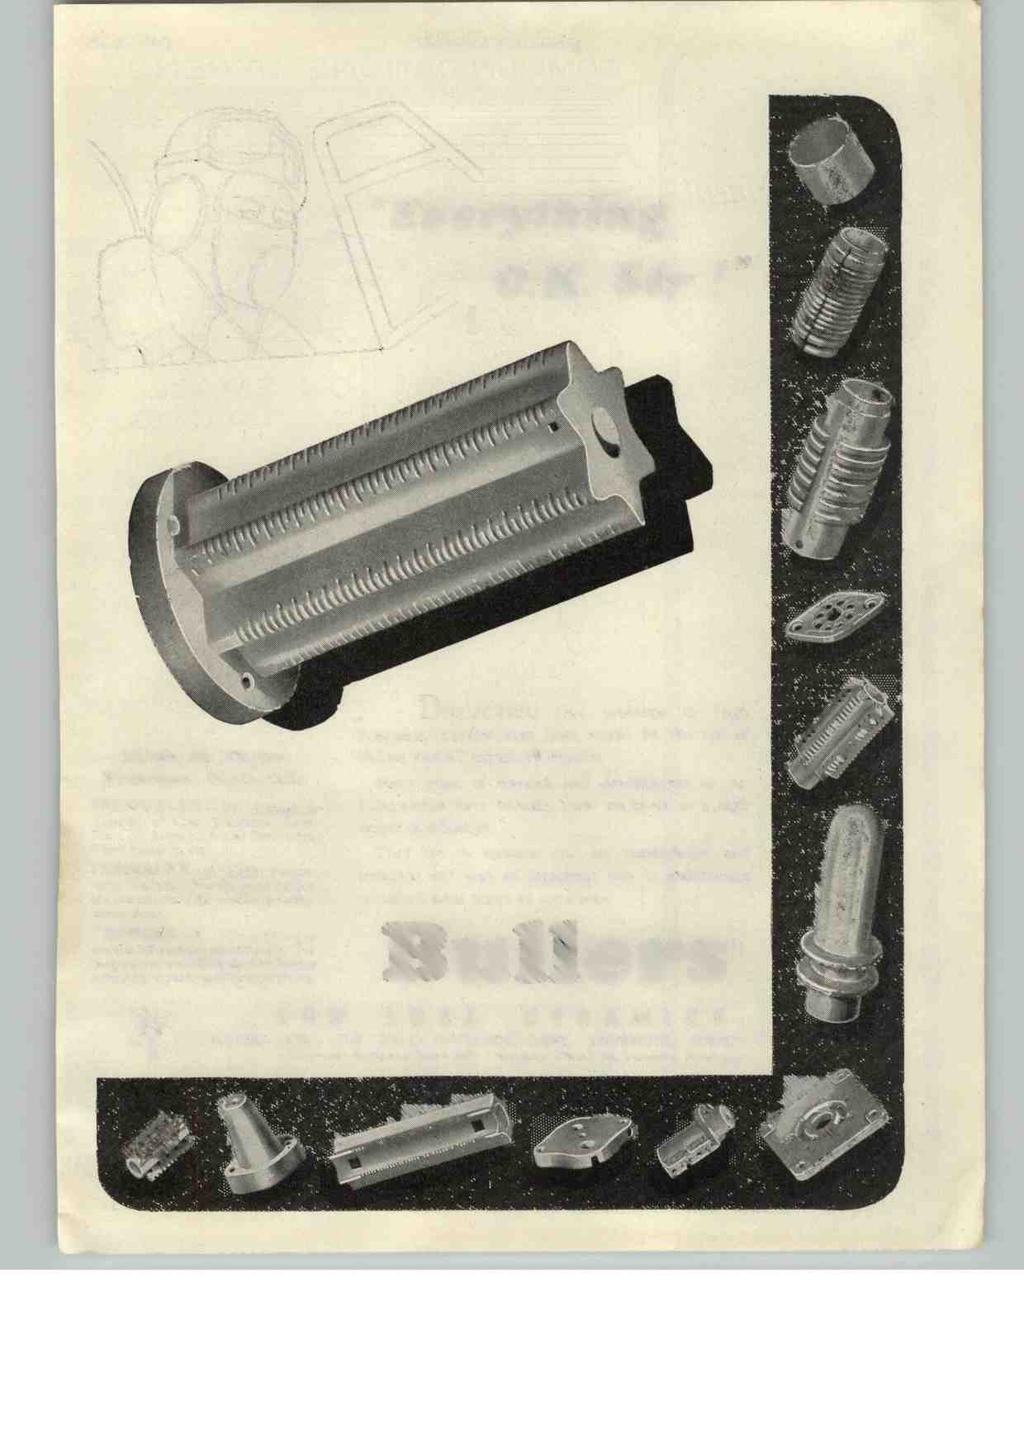 March, 1943 Electronic Engineering 403 "Everything O.K. Sir!" Made in Three Principal Materials FREQUELEX-An Insulating material of Low Dielectric Loss.